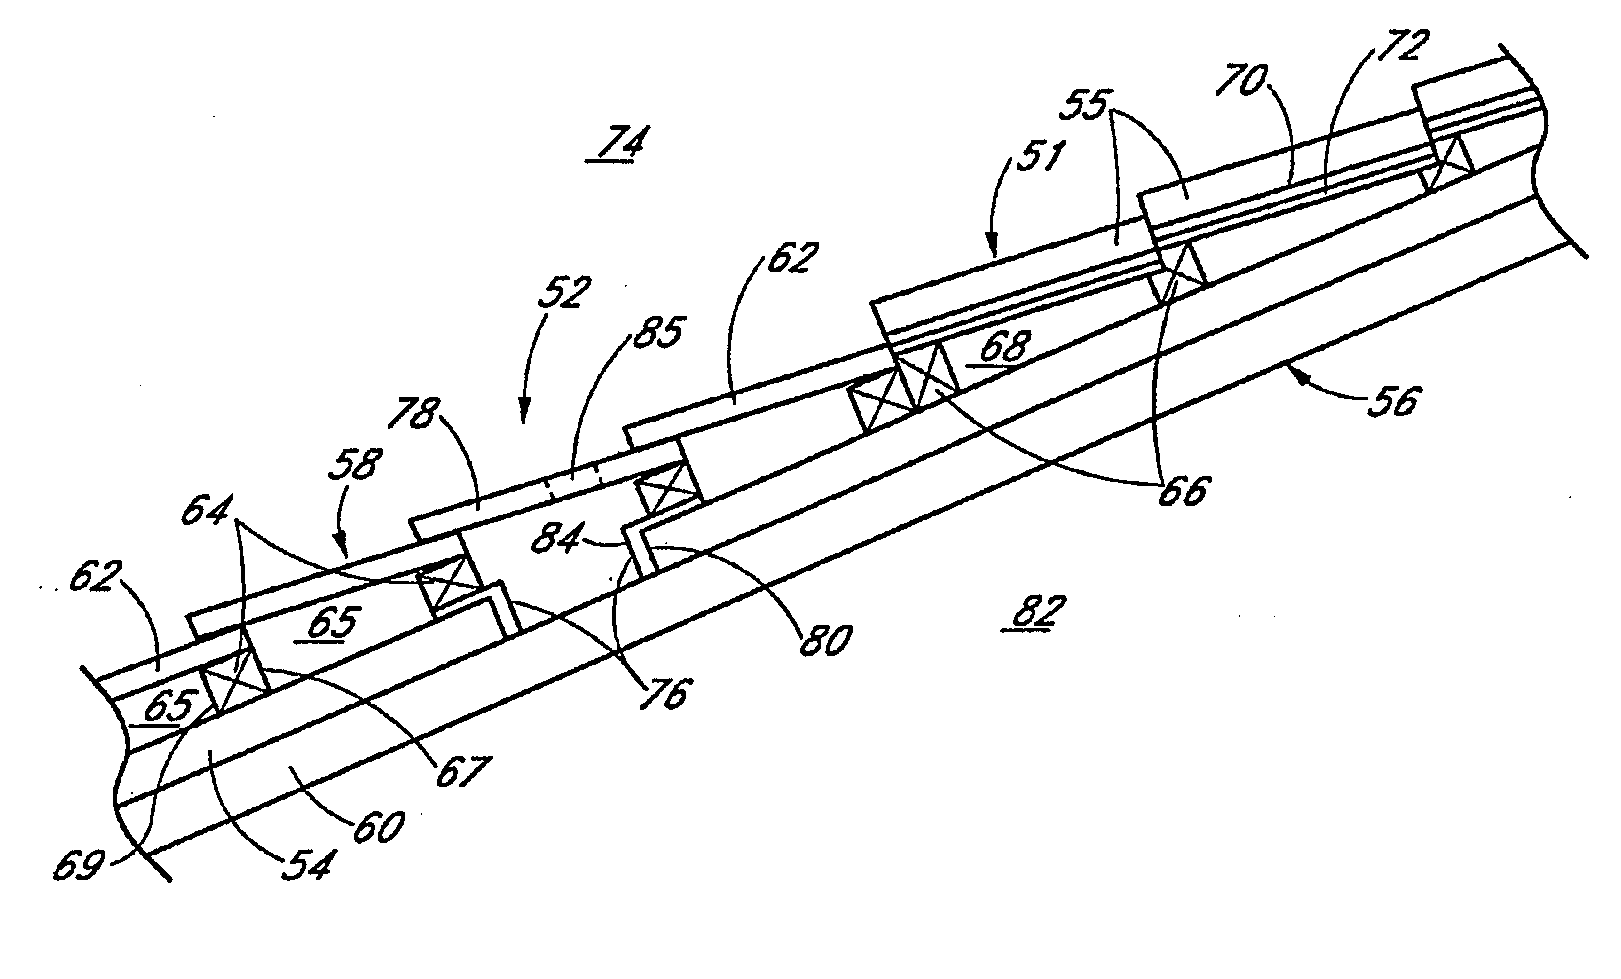 Apparatus and methods for ventilation of solar roof panels